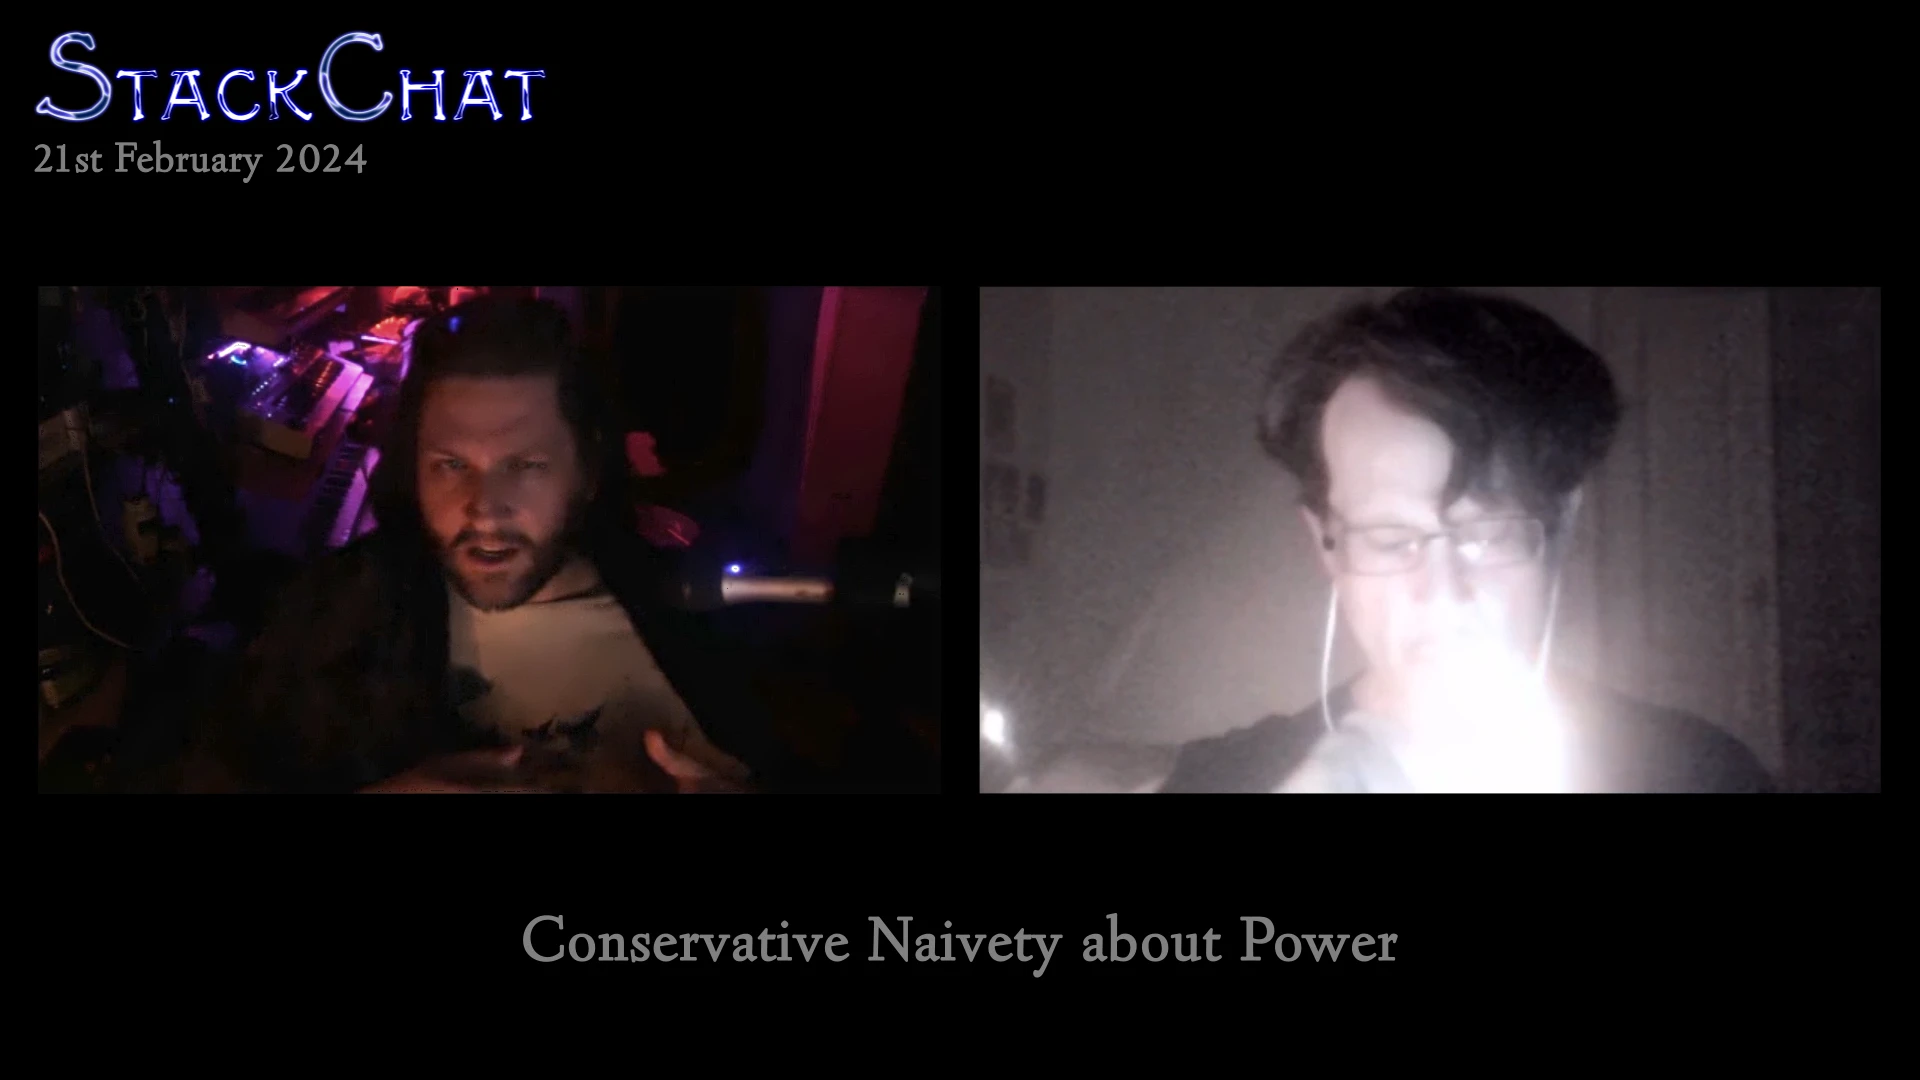 StackChat: Conservative Naivety about Power [Martin Lichtmesz]